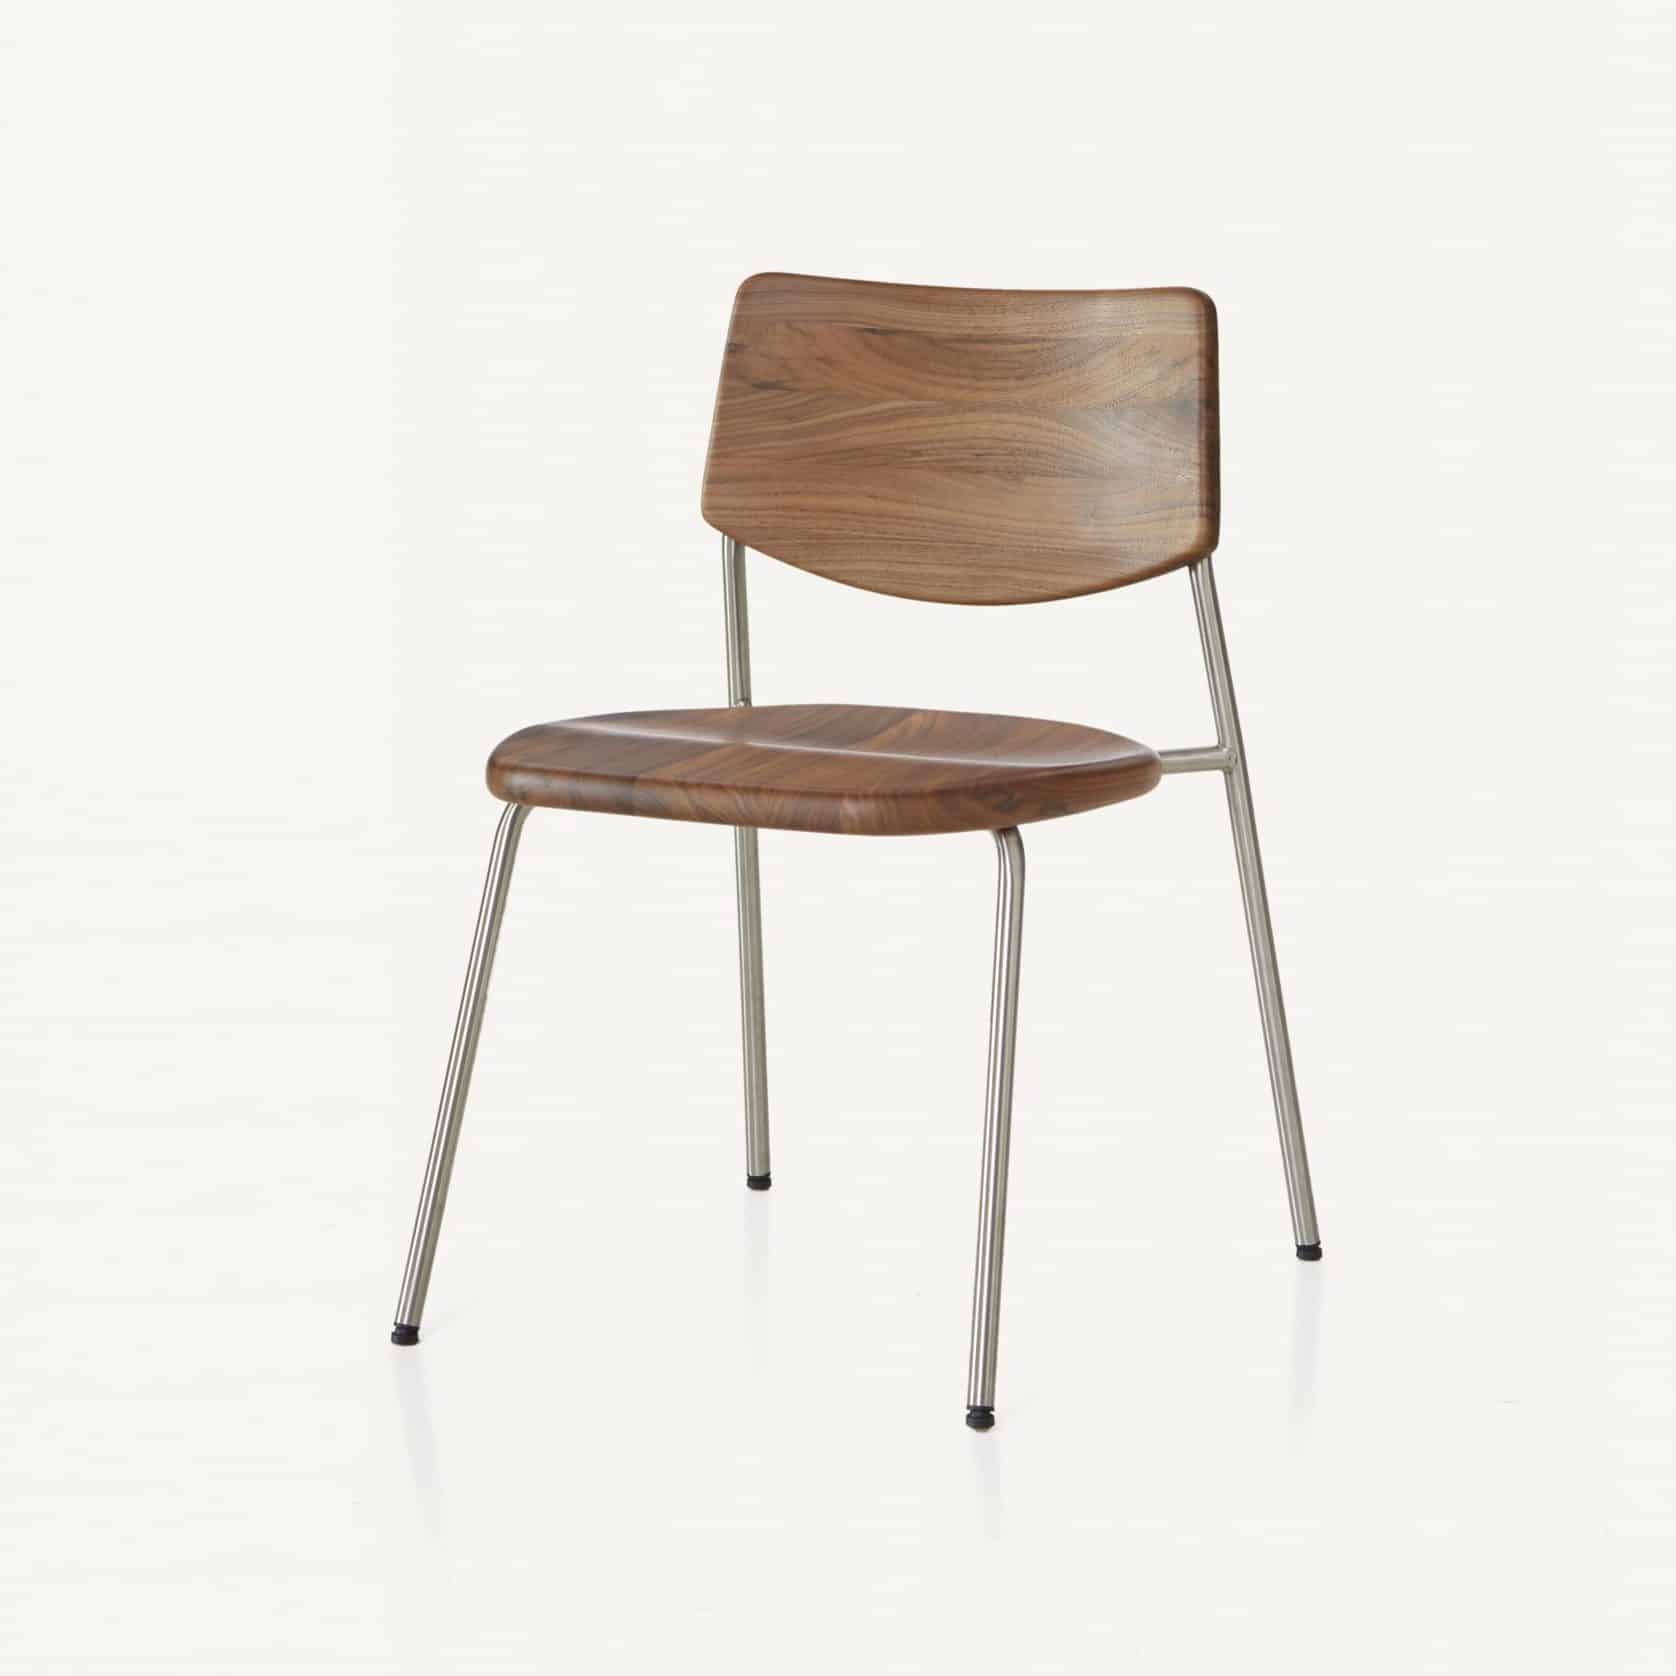 BassamFellows CB-58 Pipe Armless Chair in Walnut and Stainless Steel, three quarter front